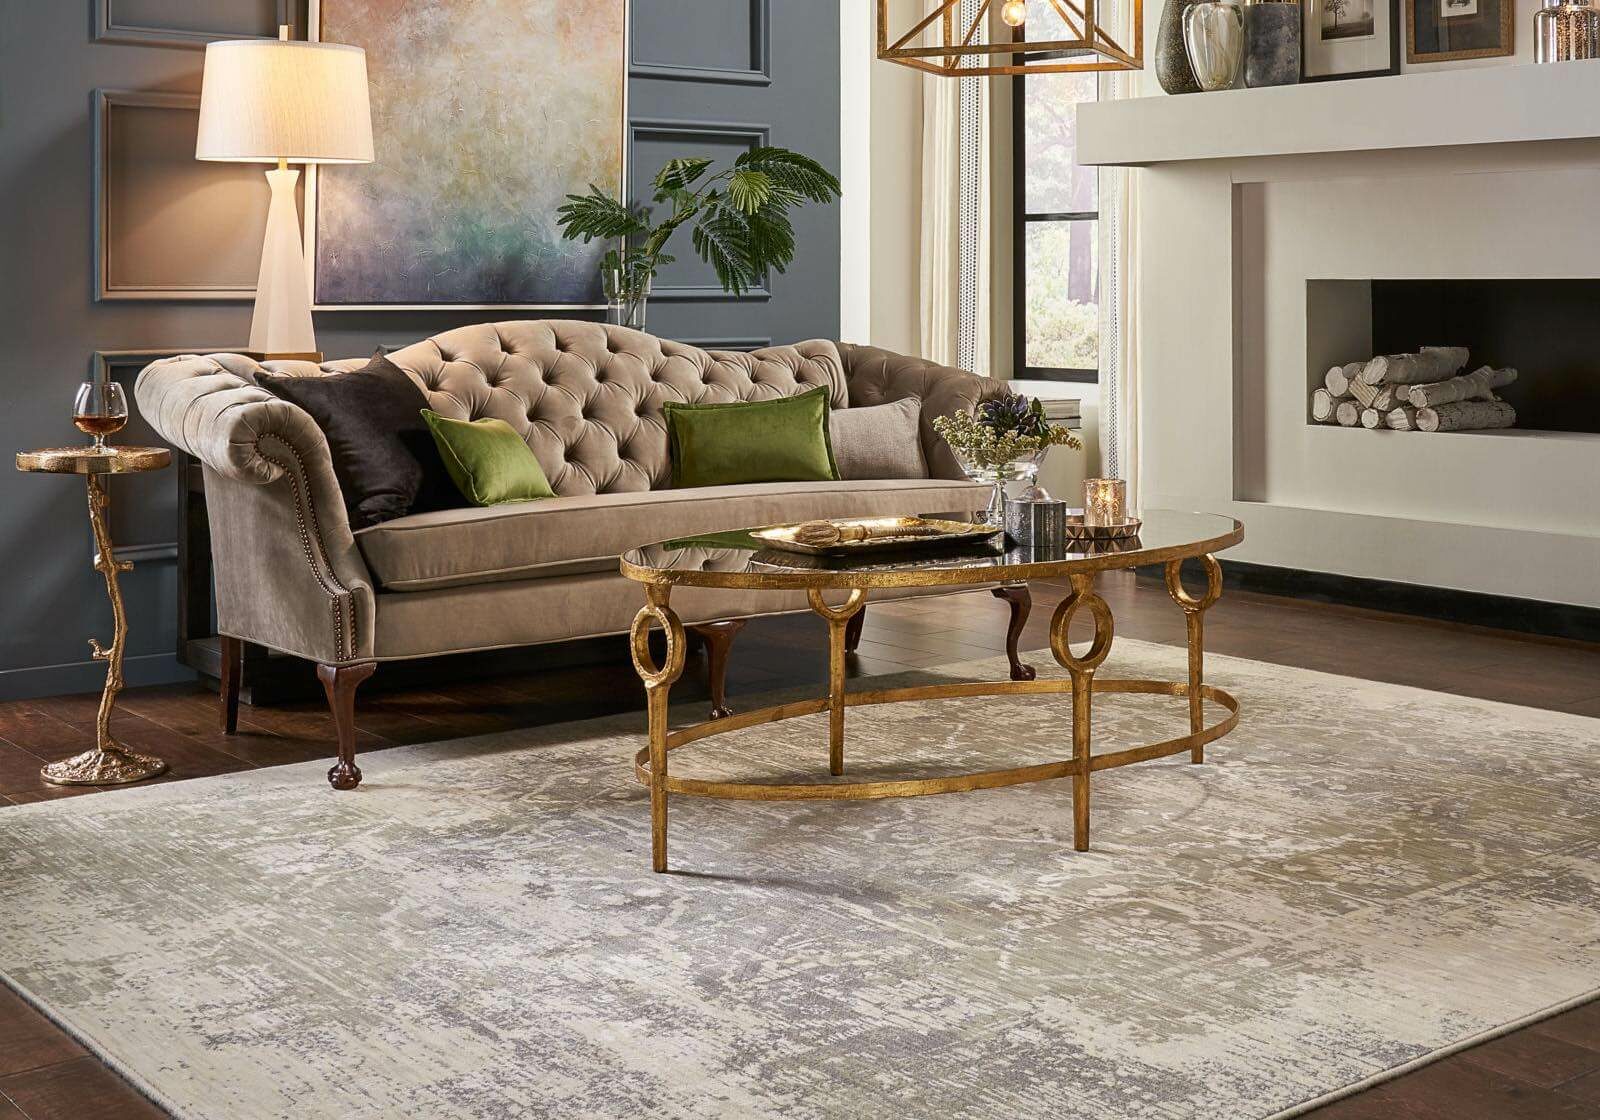 Area Rug | Country Manor Decorating